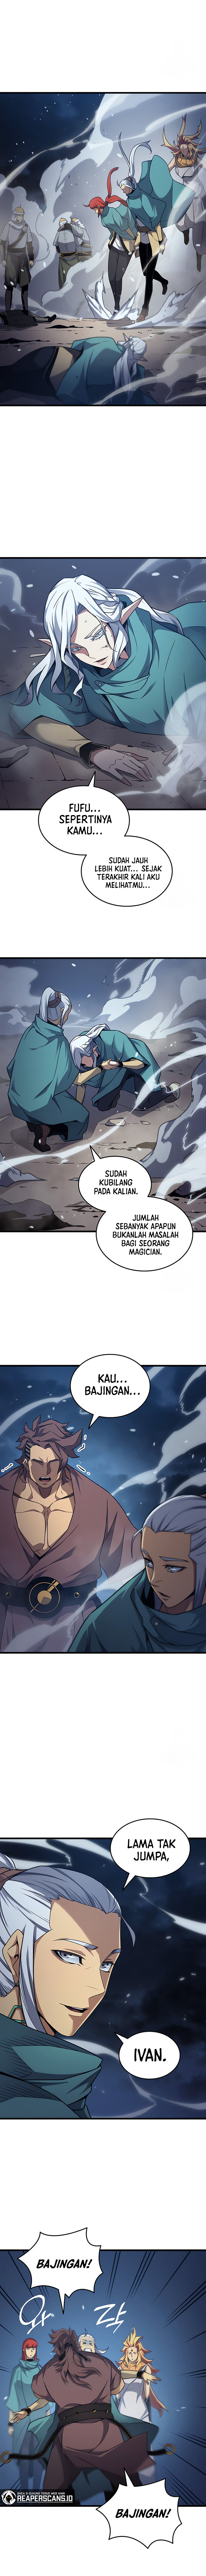 7695725157-the-great-mage-returns-after-4000-years Chapter 155